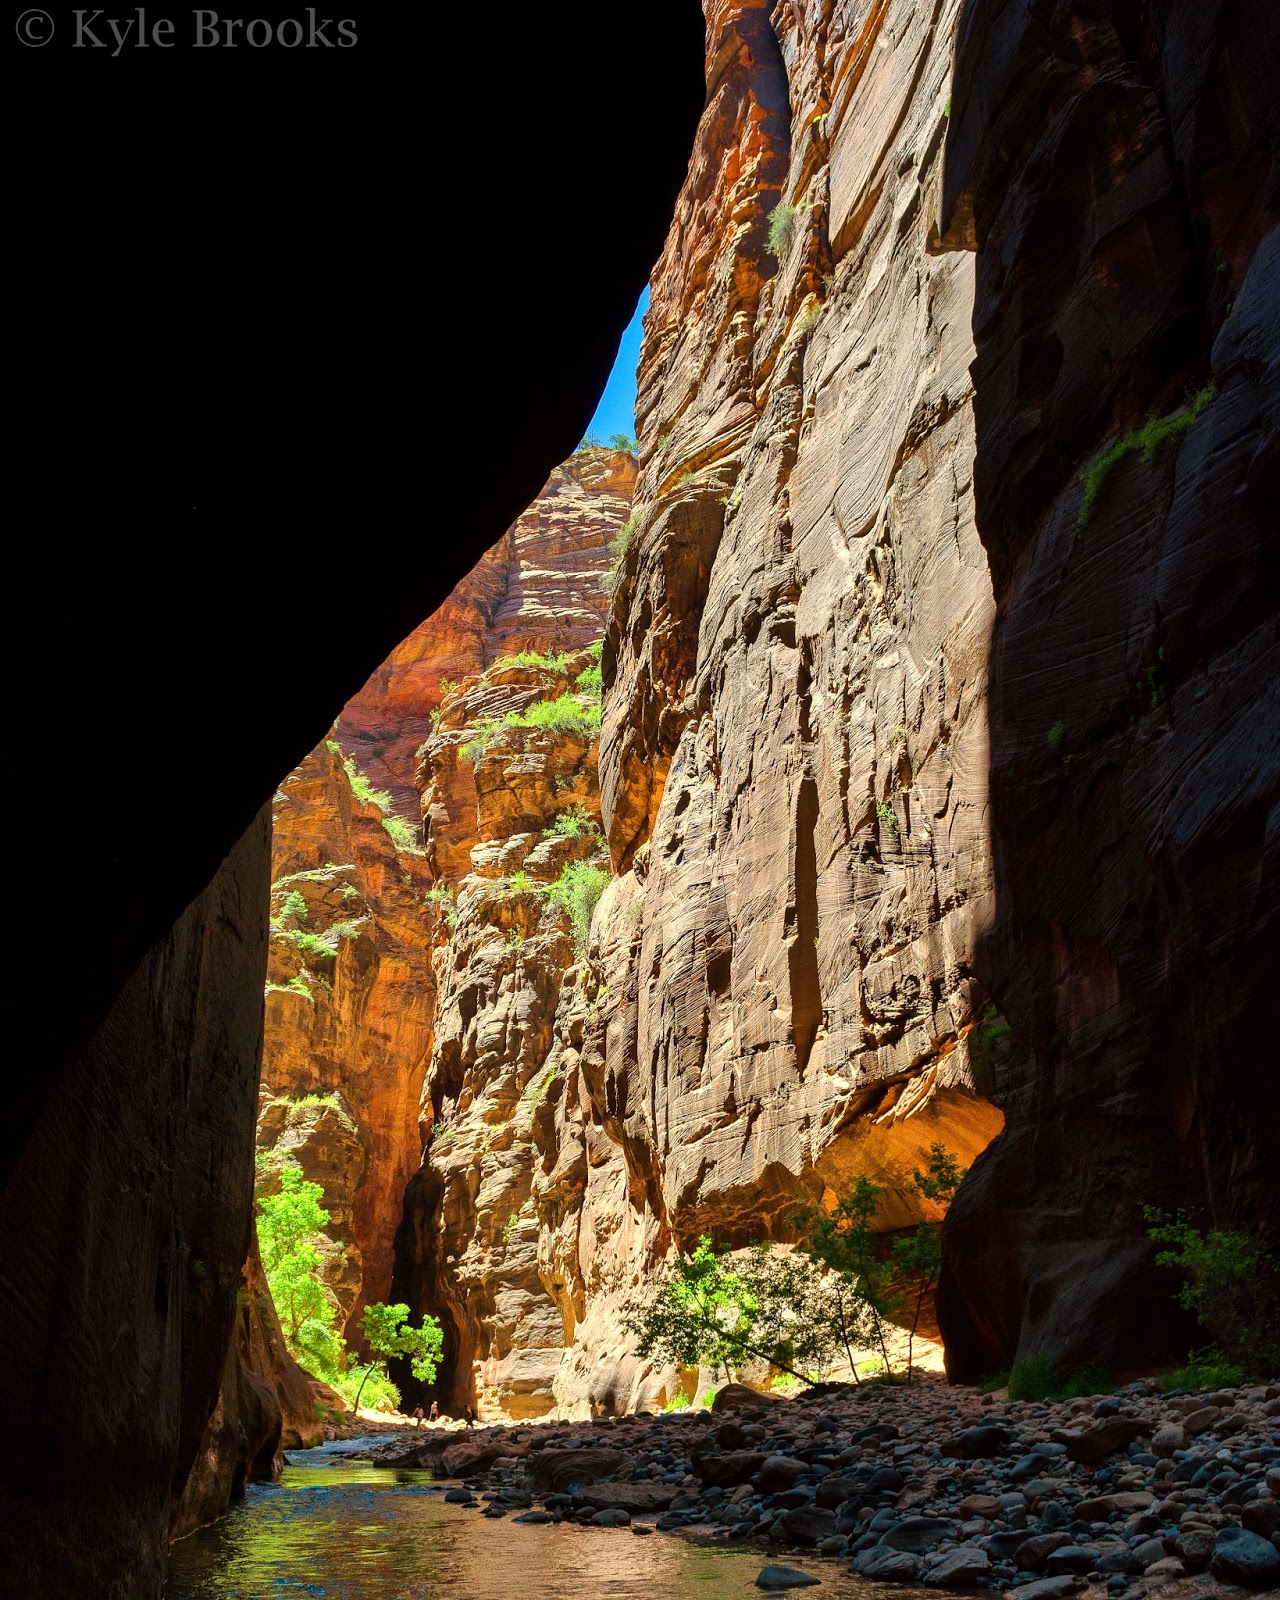 The Narrows Zion National Park